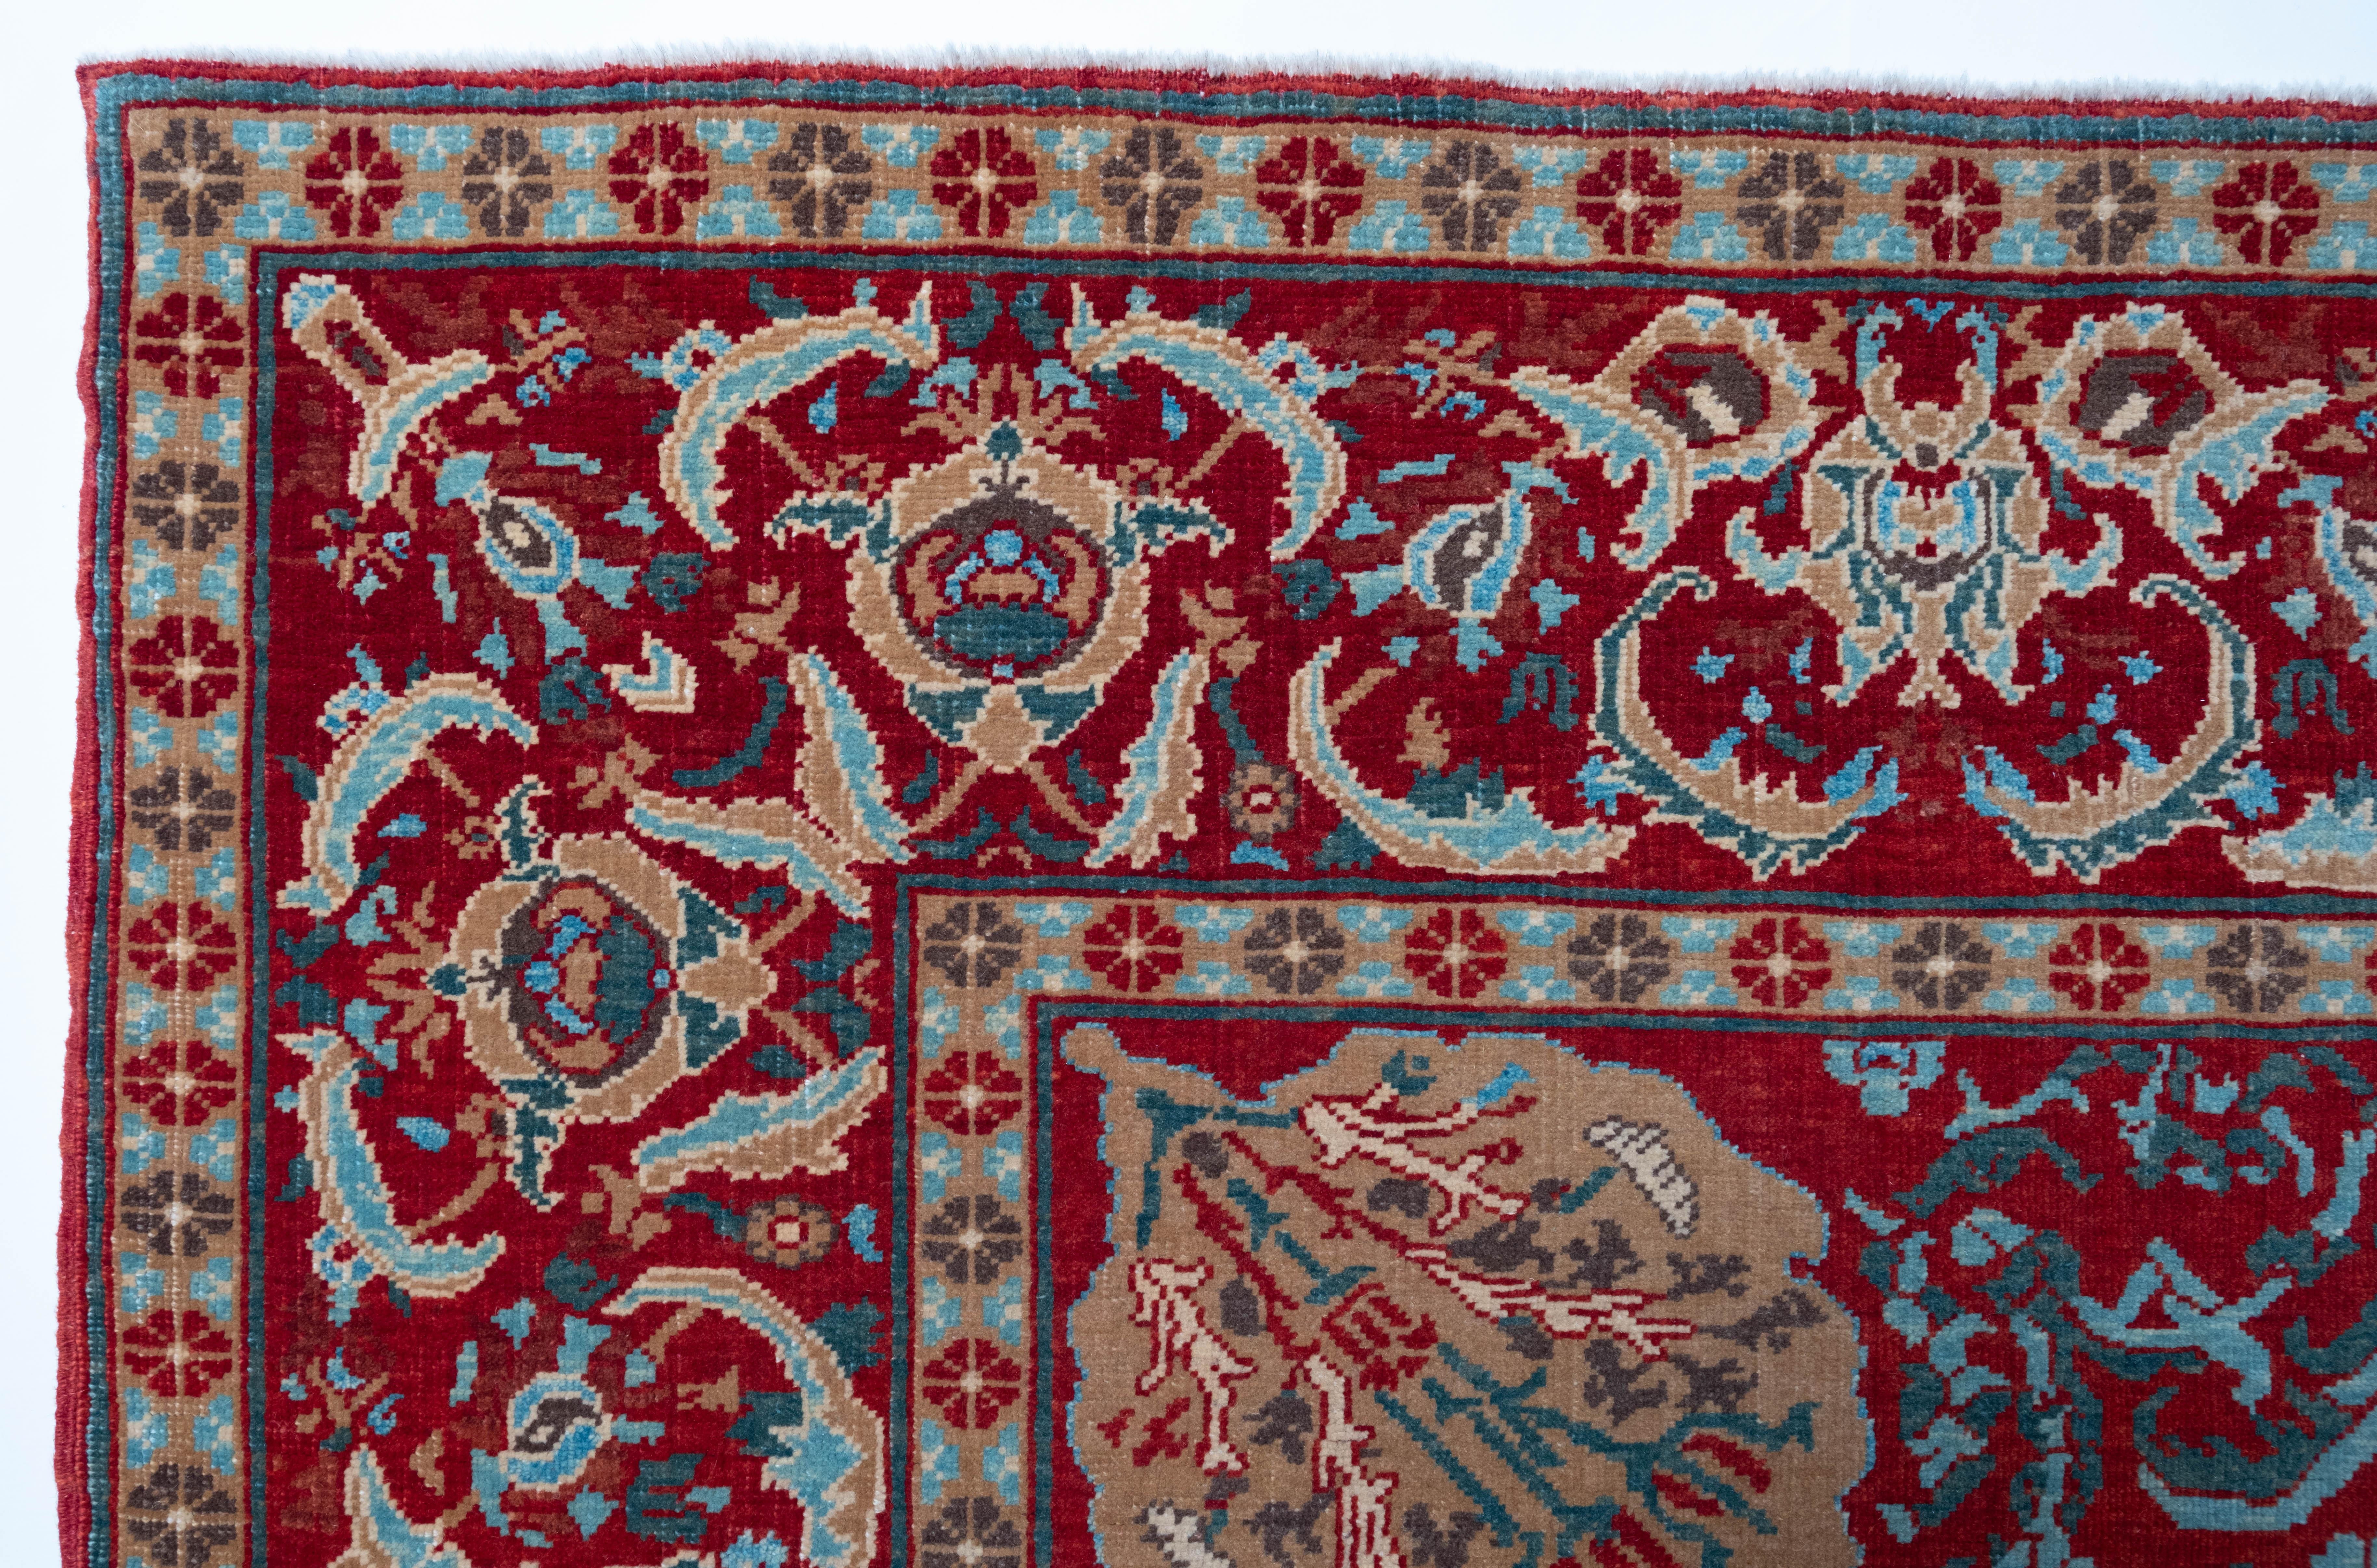 Turkish Court Manufactury Rugs were woven in the Egyptian workshops founded by Ottoman Empire in the 16th century. Those carpets were woven in Egypt, following the paper cartoons probably created in Istanbul and sent to Cairo at that time.The source